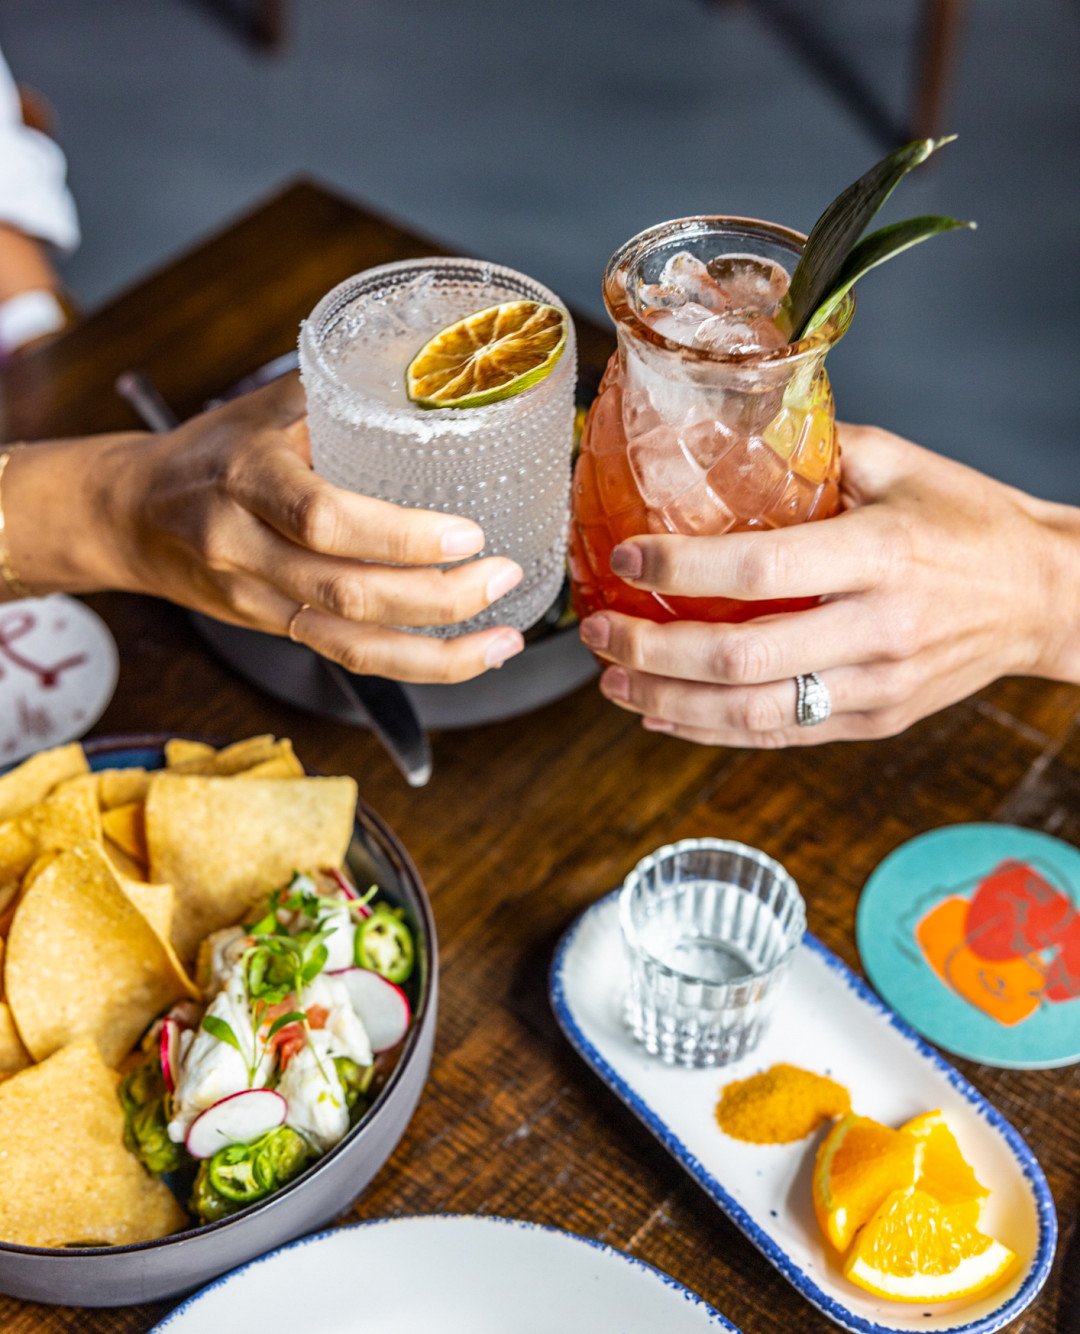 &iexcl;Feliz Cinco de Mayo! Swipe for a sneak peek of our specials available May 4 - May 5: 

🌮 PULPO AL PASTOR TACOS
grilled pineapple and tender pulpo marinated in achiote adobo, topped with tomatillo salsa, cilantro, and salsa macha. 
 
🍹CINCO M